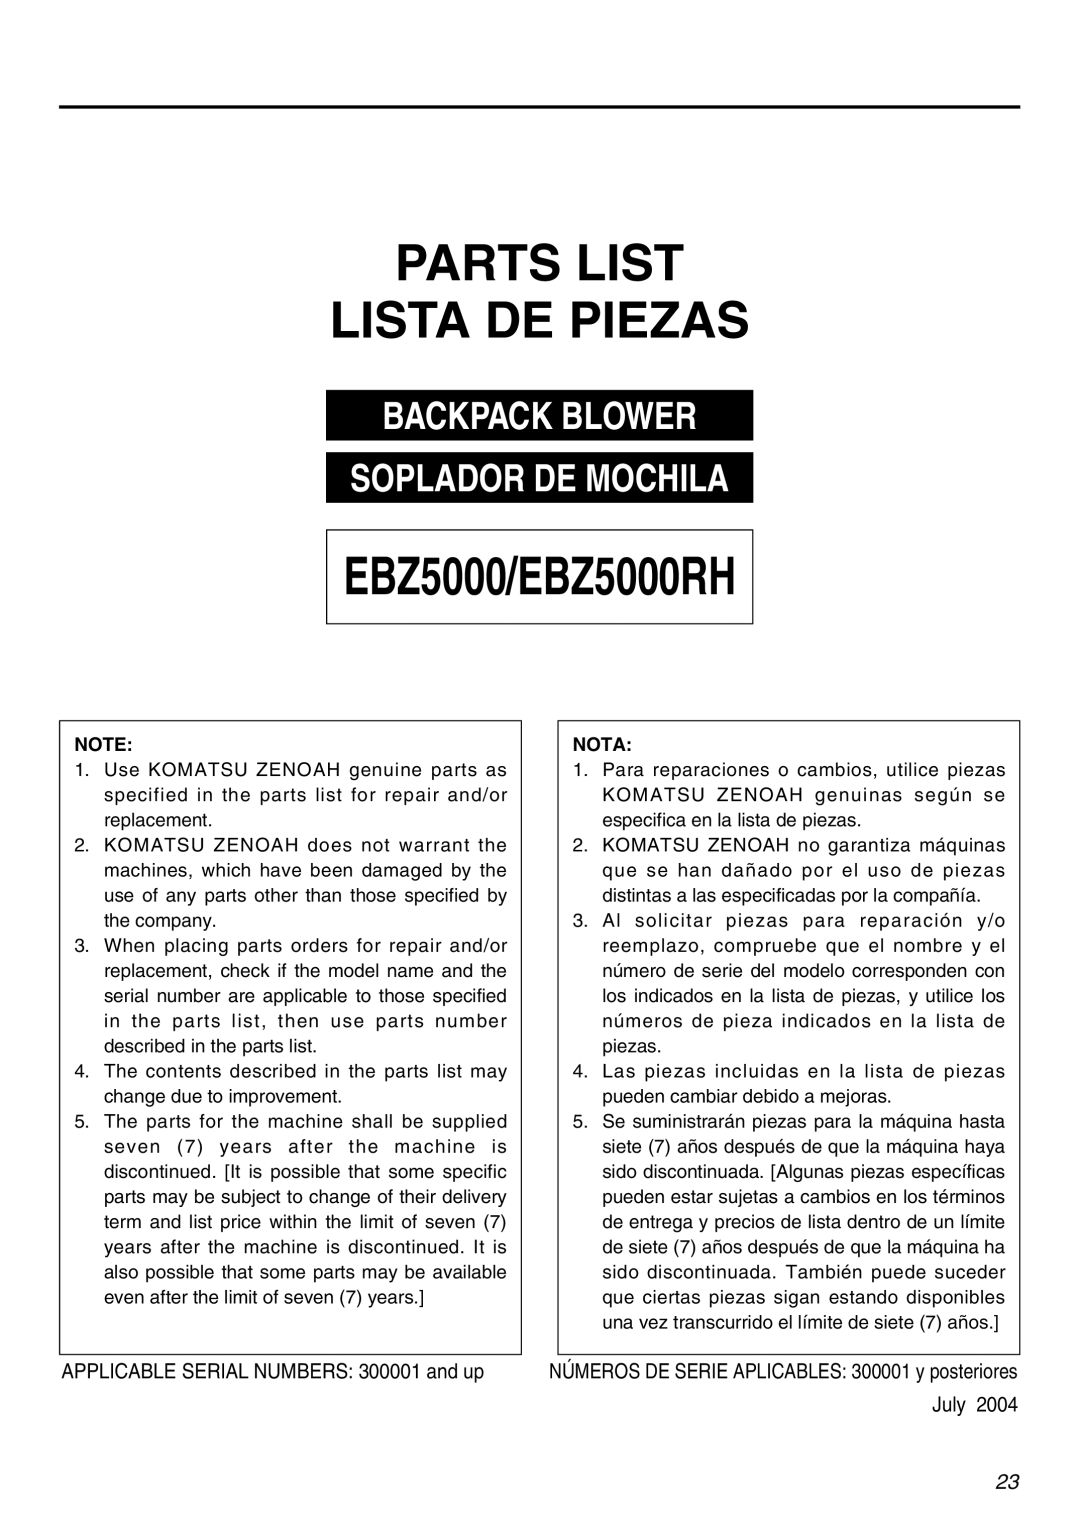 RedMax manual Parts List Lista De Piezas, APPLICABLE SERIAL NUMBERS 300001 and up, July, EBZ5000/EBZ5000RH, Nota 